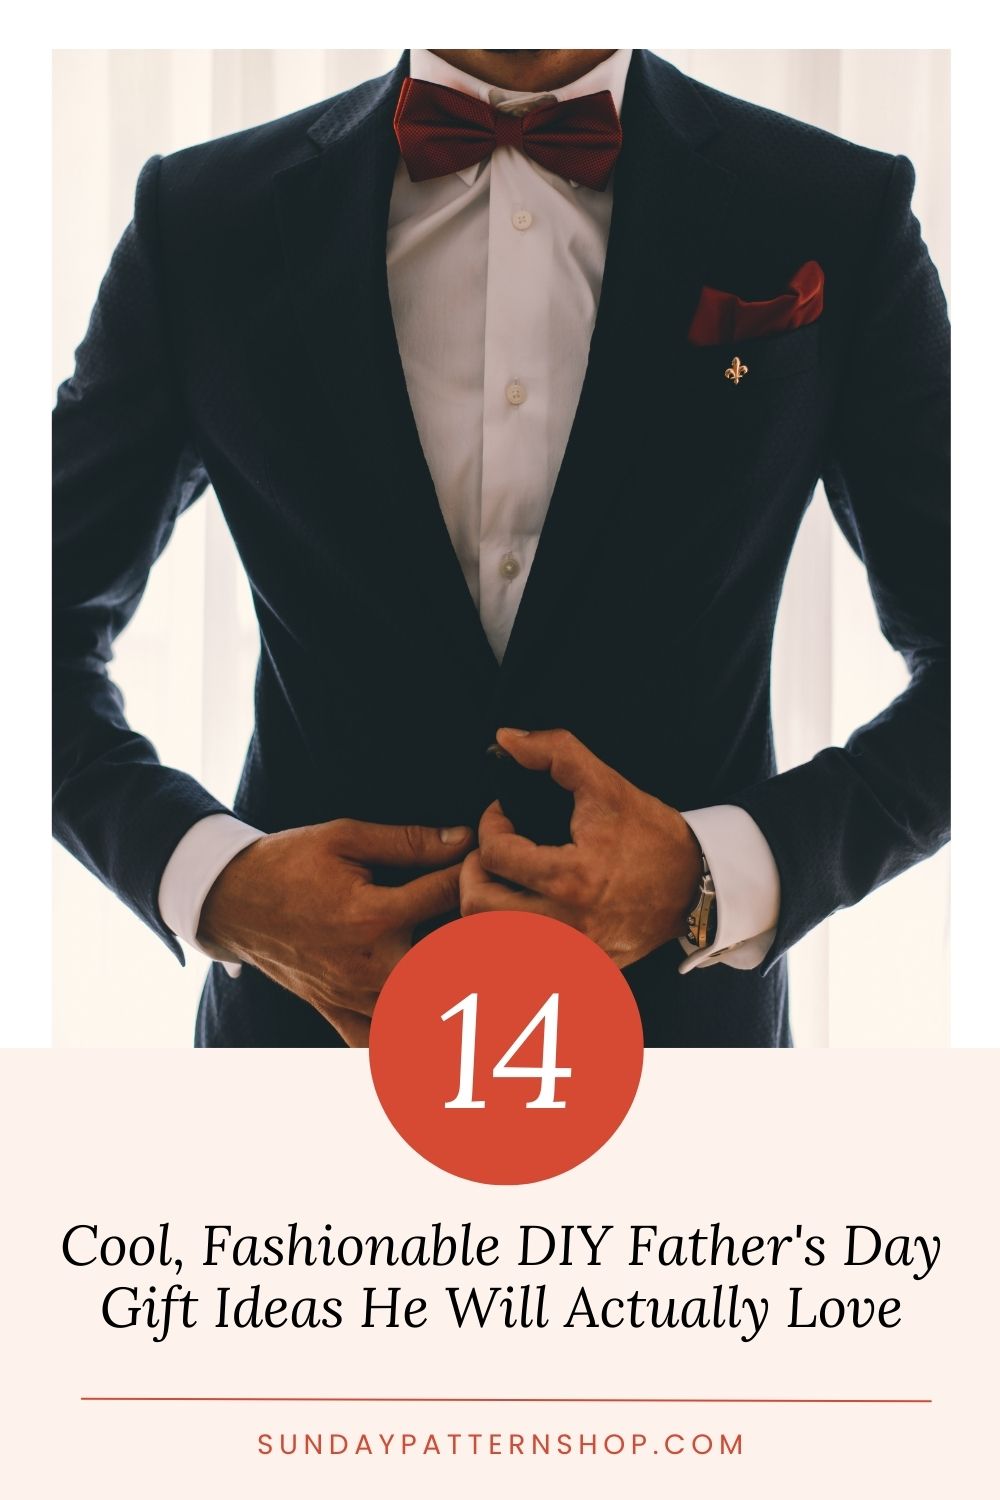 Cool DIY fathers day gift ideas